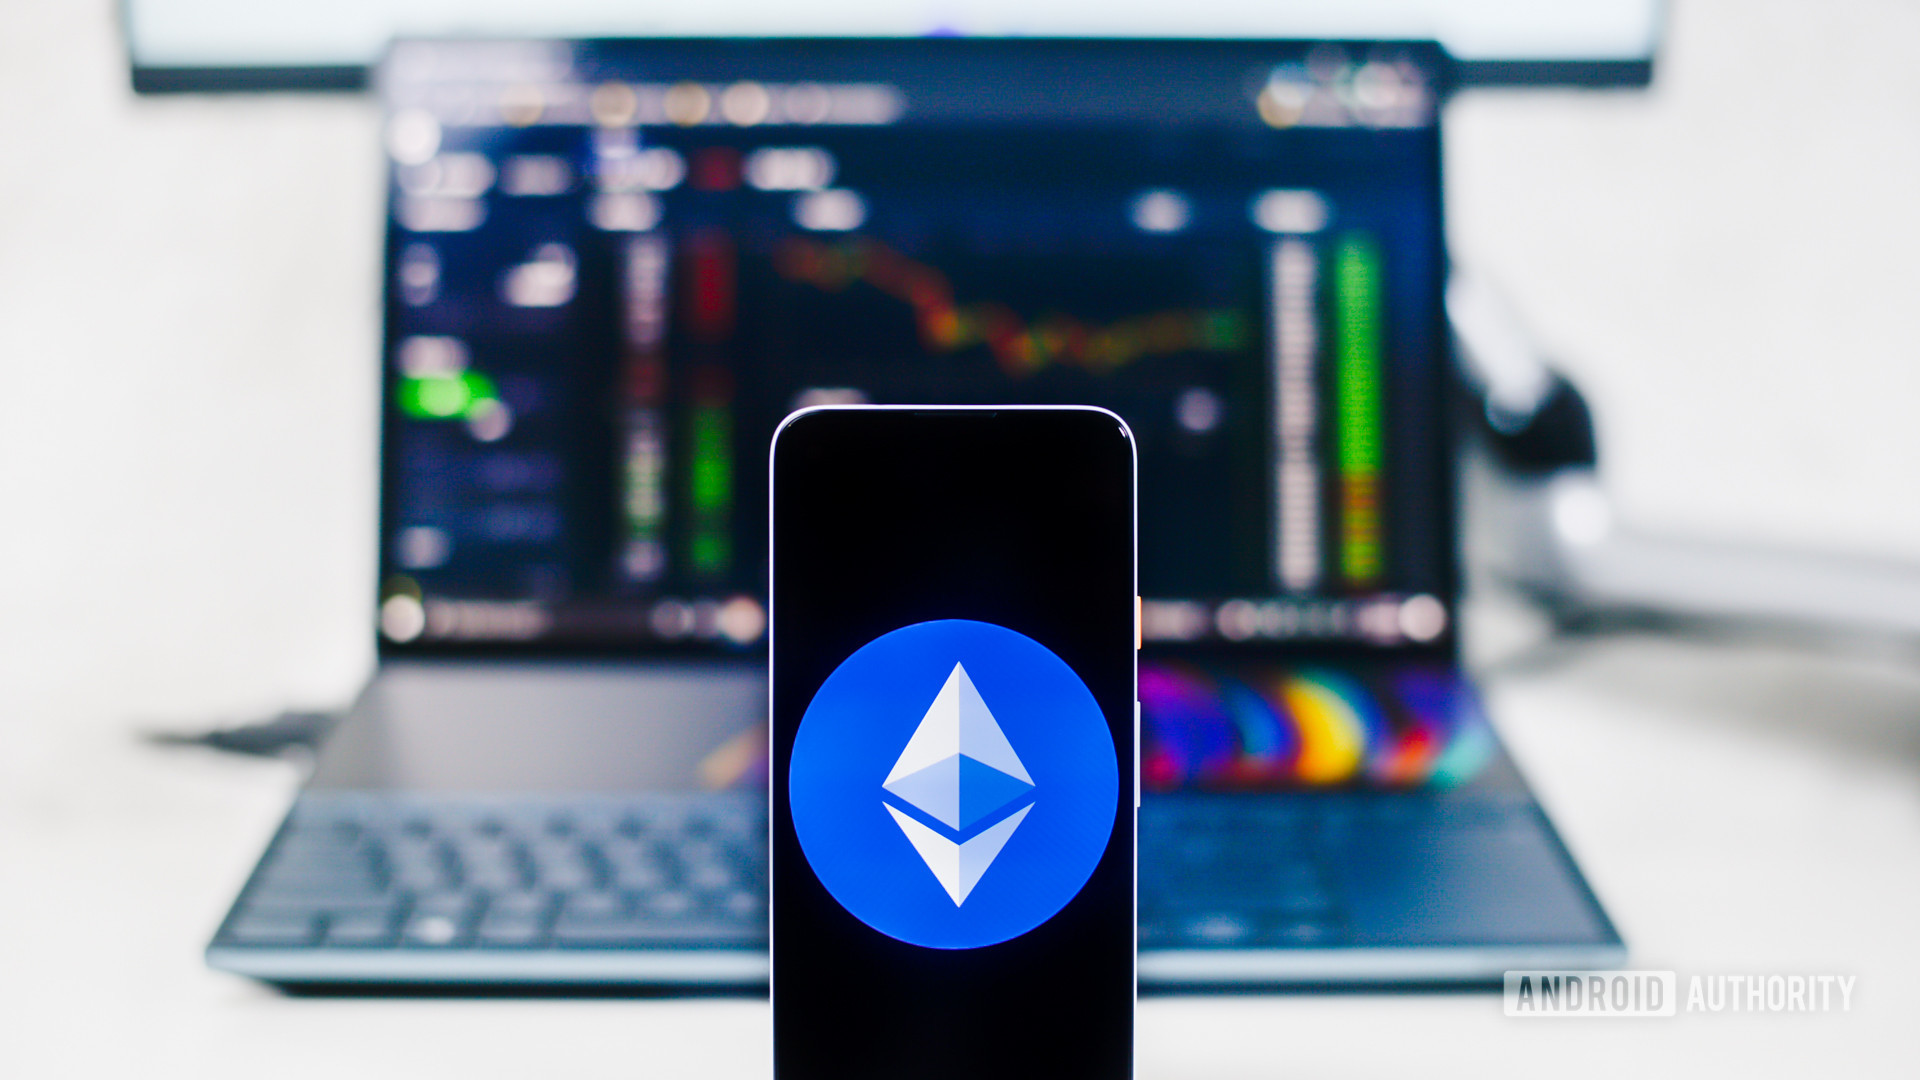 Ethereum on a smartphone and laptop.